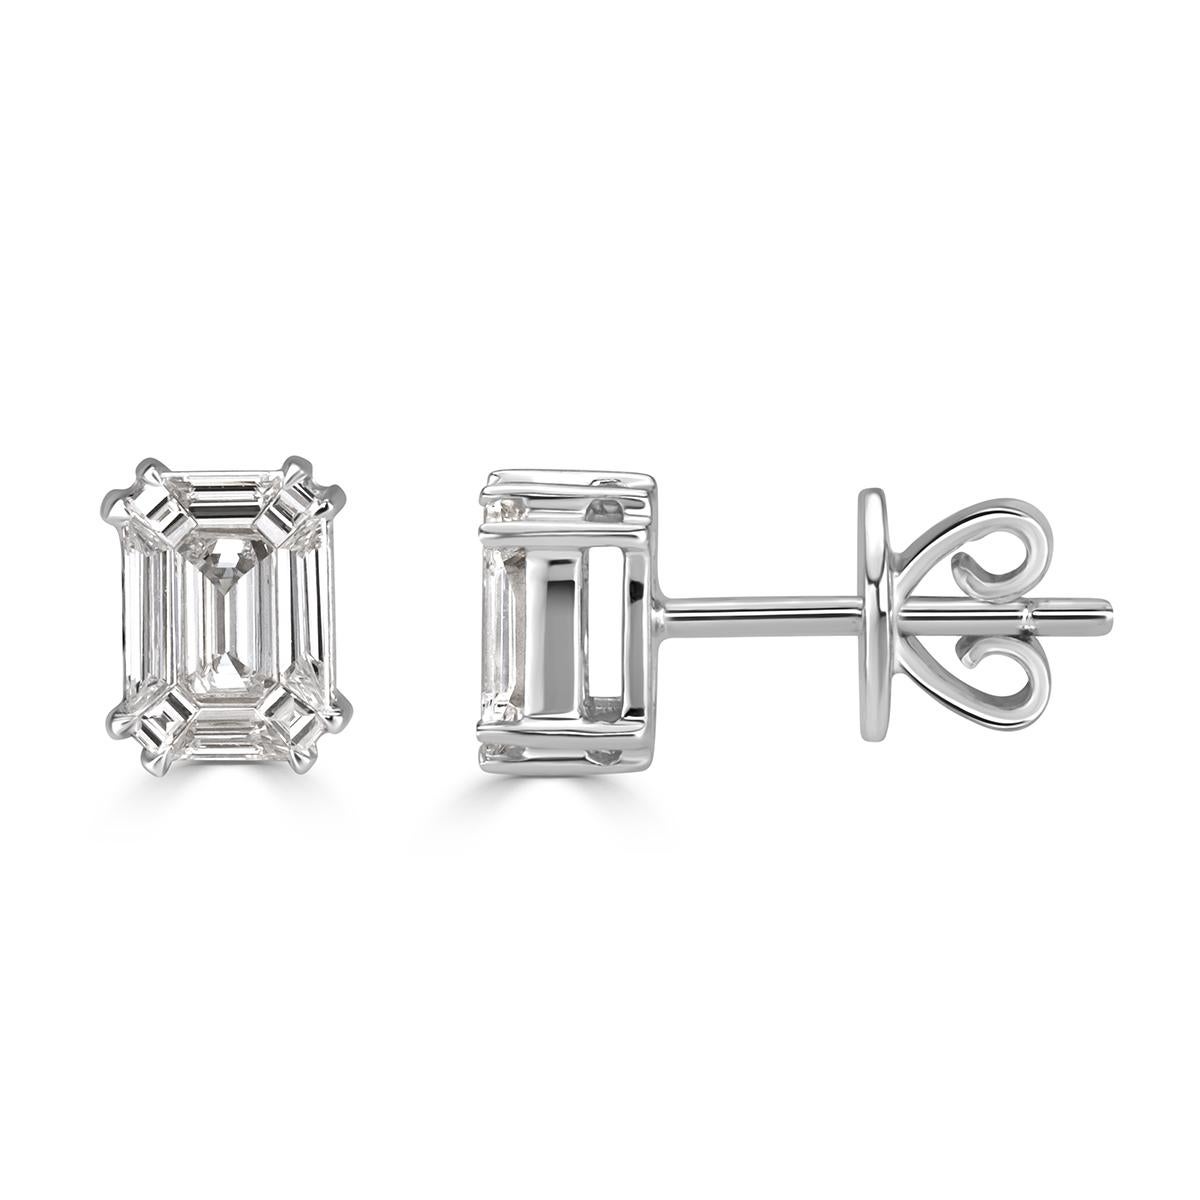 This ravishing pair of diamond stud earrings features two gorgeous emerald cut diamonds with a total weight of 0.48ct and measuring 6.00 x 4.60m. They are graded at E-F, VS1-VS2 and set in high polish 18k white gold.
